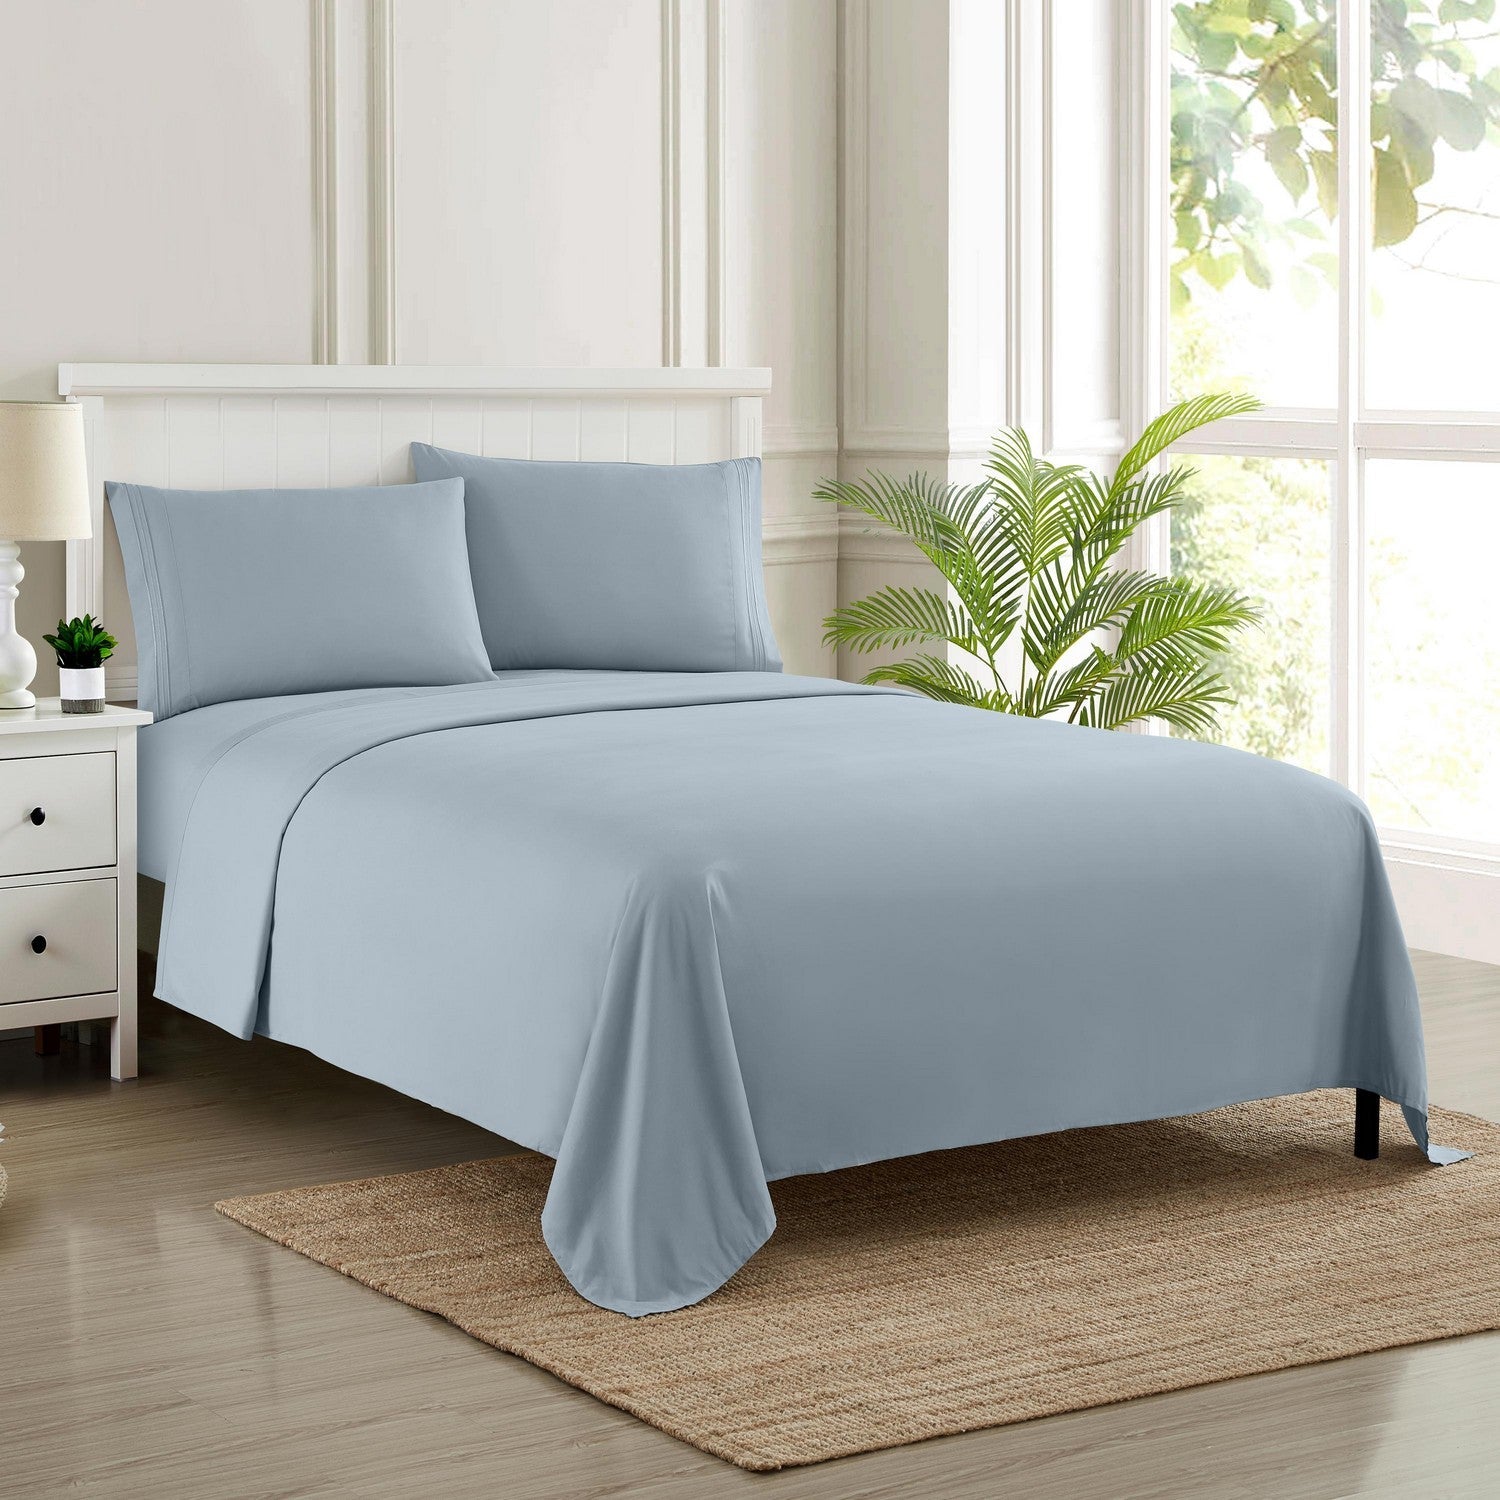 Classic 4-Piece Bed Sheet Set (Misty Blue) - Bed